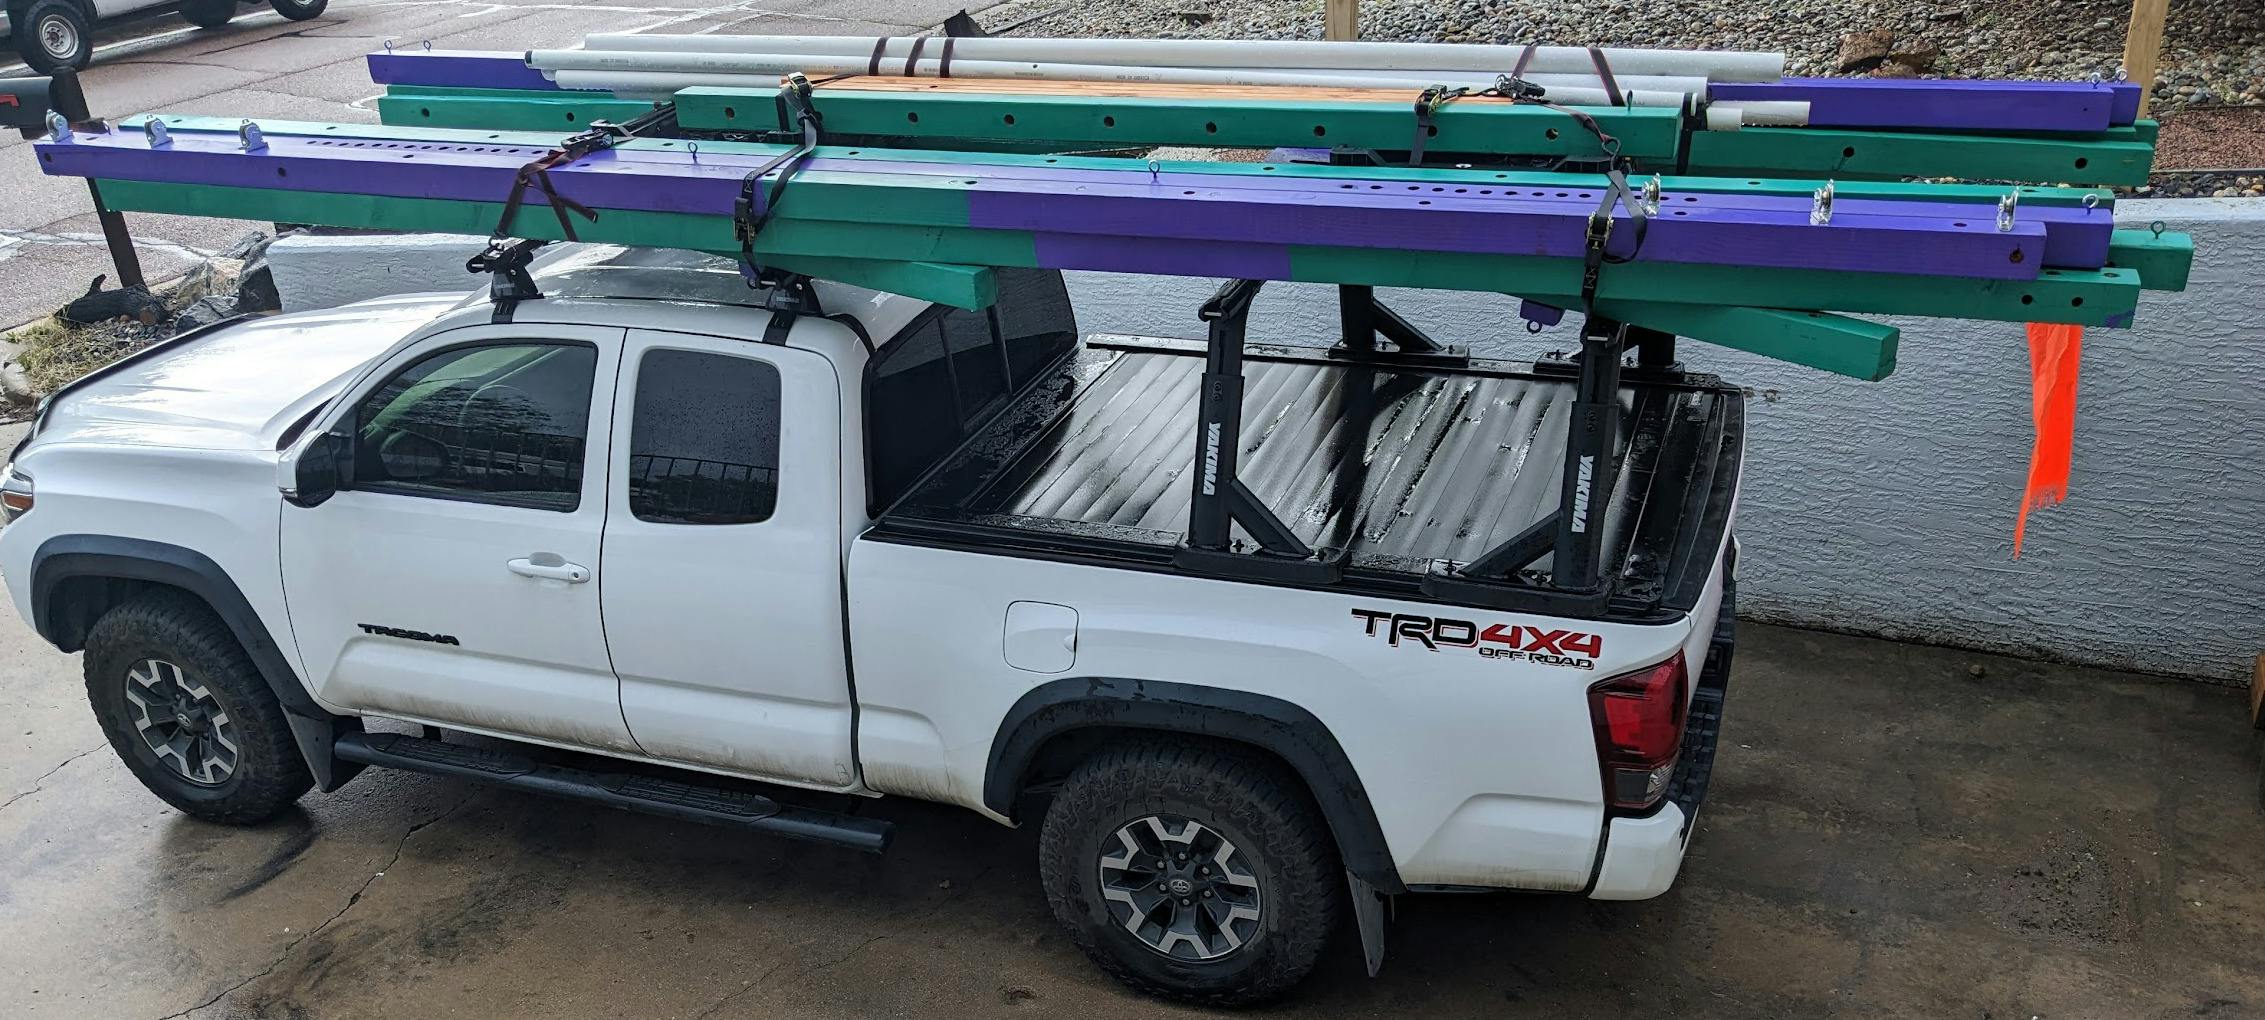 16-foot beams on a toyota tacoma, ratchet strapped to the kind of roof racks you might use to transport a kayak